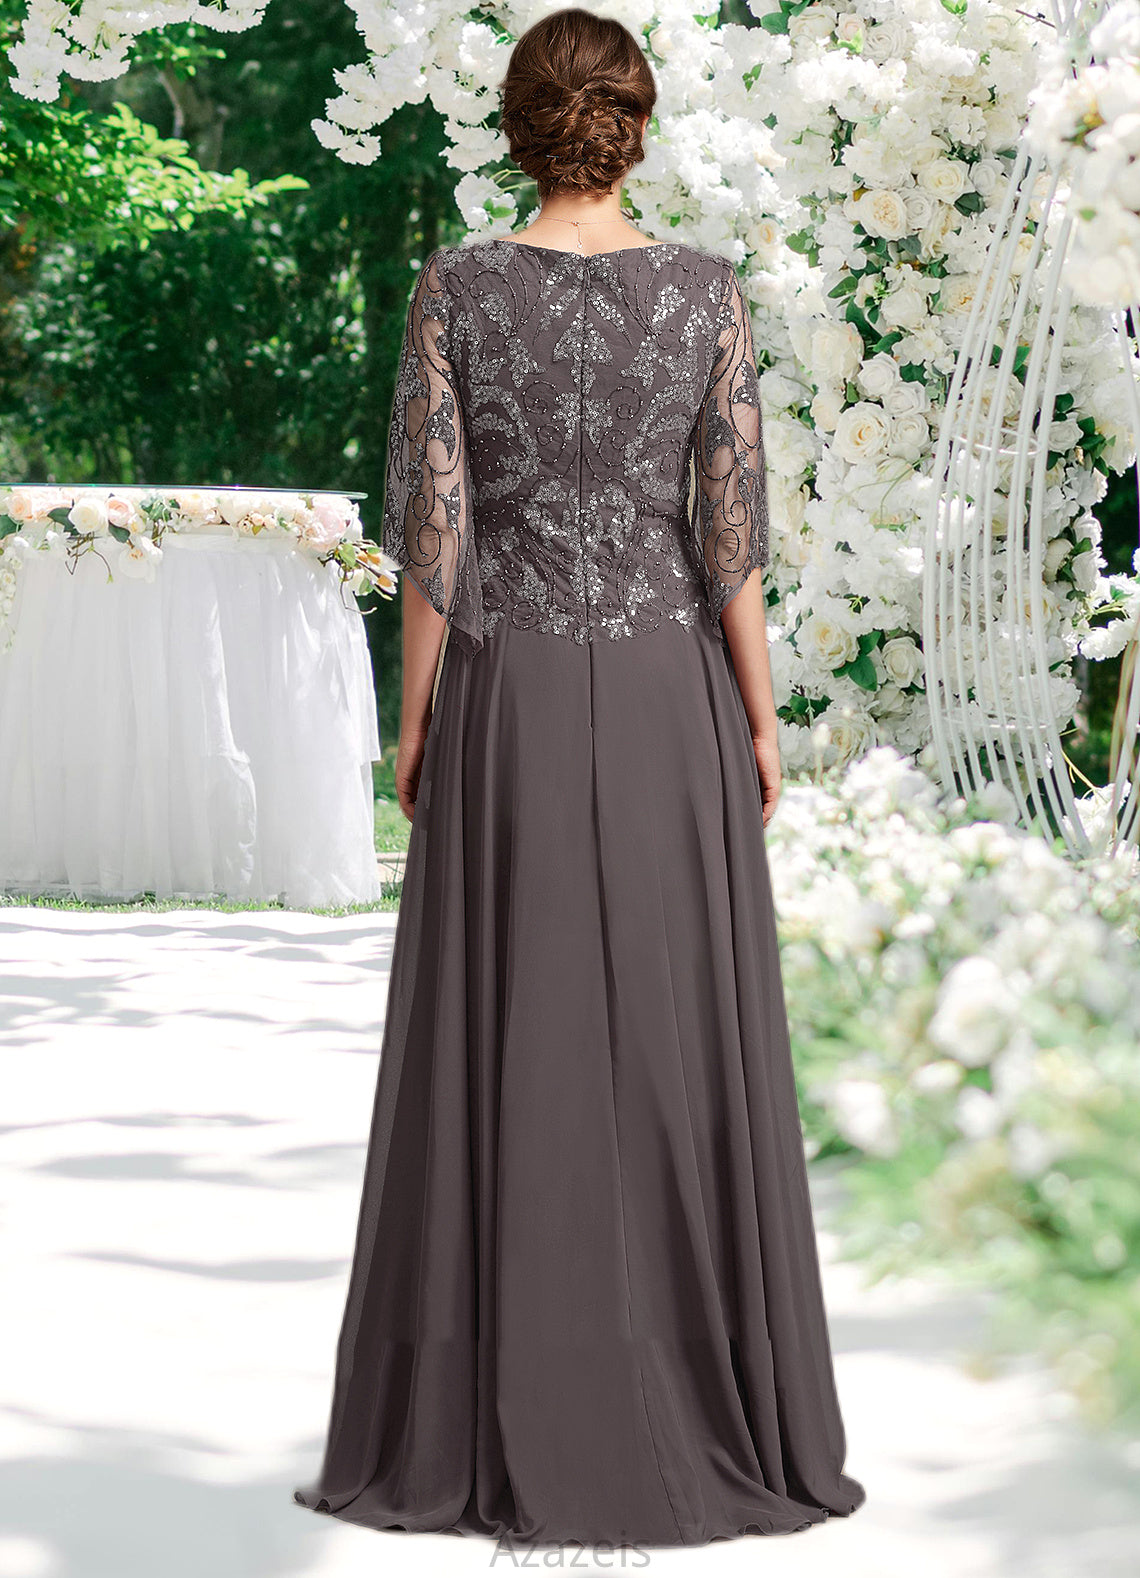 Krista A-Line Scoop Neck Floor-Length Chiffon Lace Mother of the Bride Dress With Beading Sequins DF126P0015036